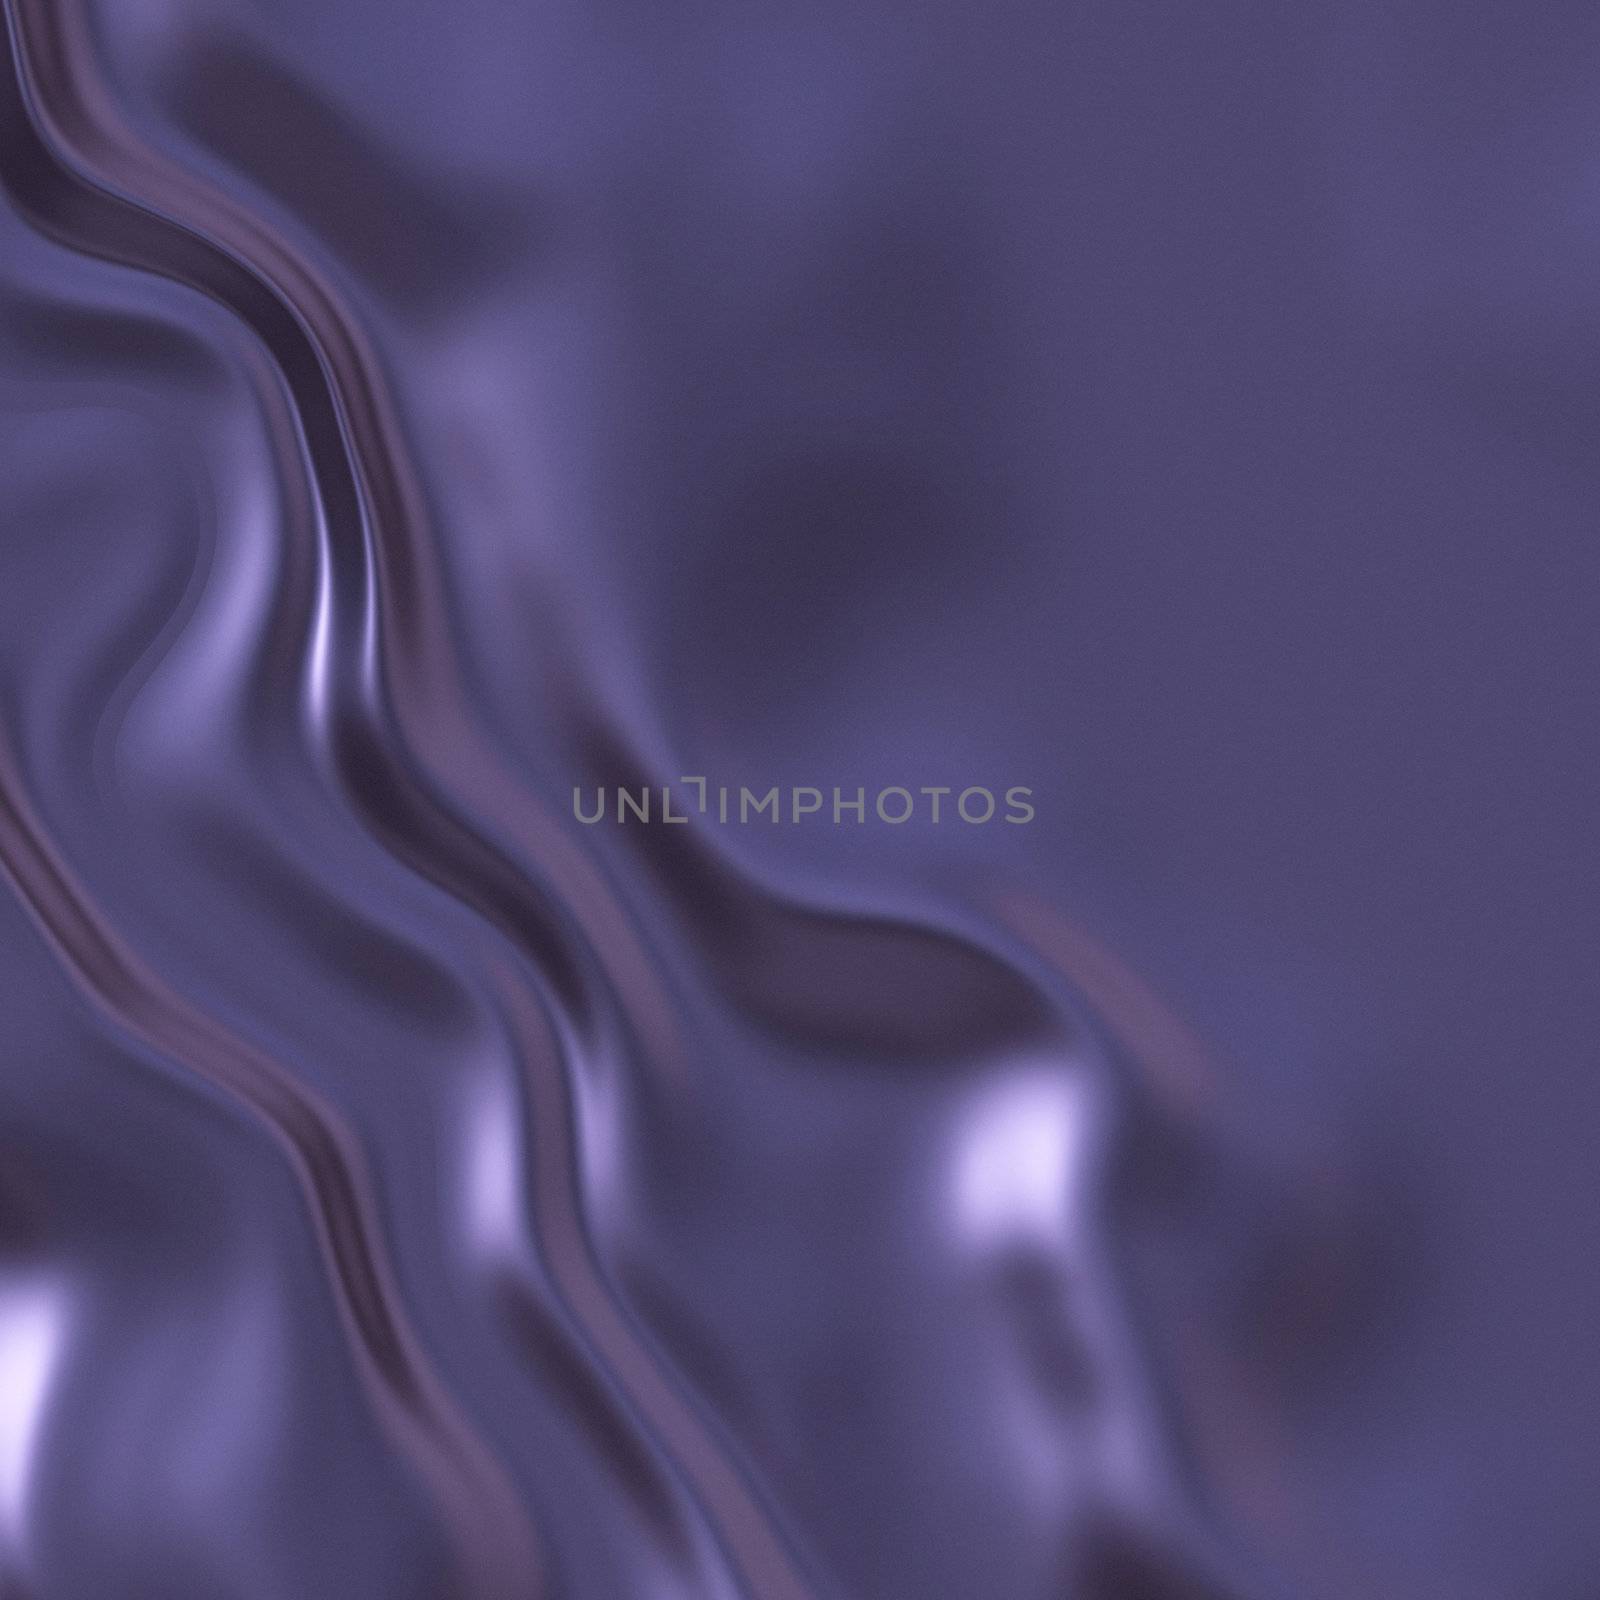 An image of a nice purple silk background